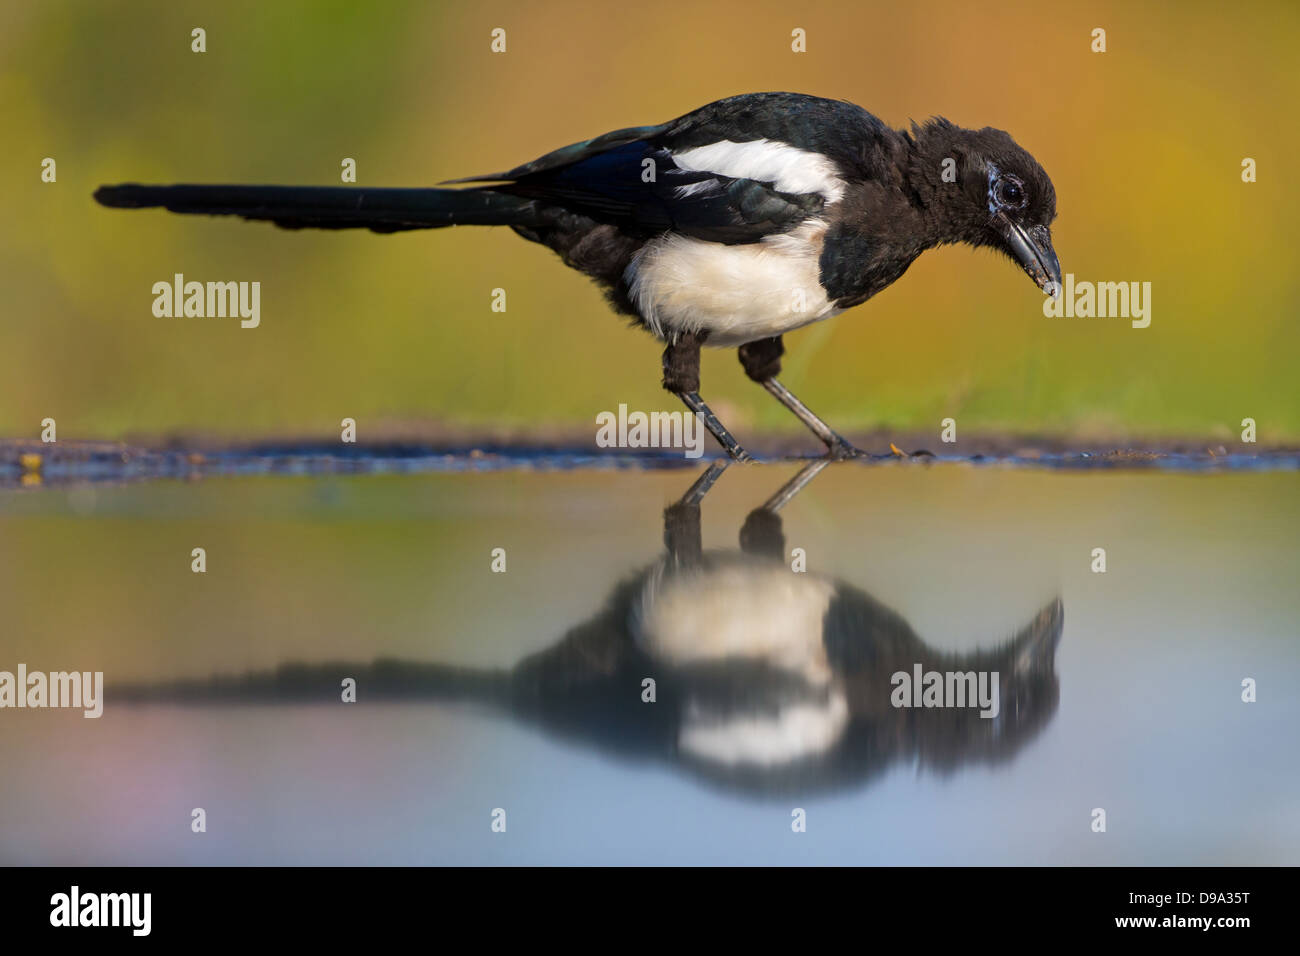 Black-billed Magpie, Magpie, Pica pica, Elster Stock Photo